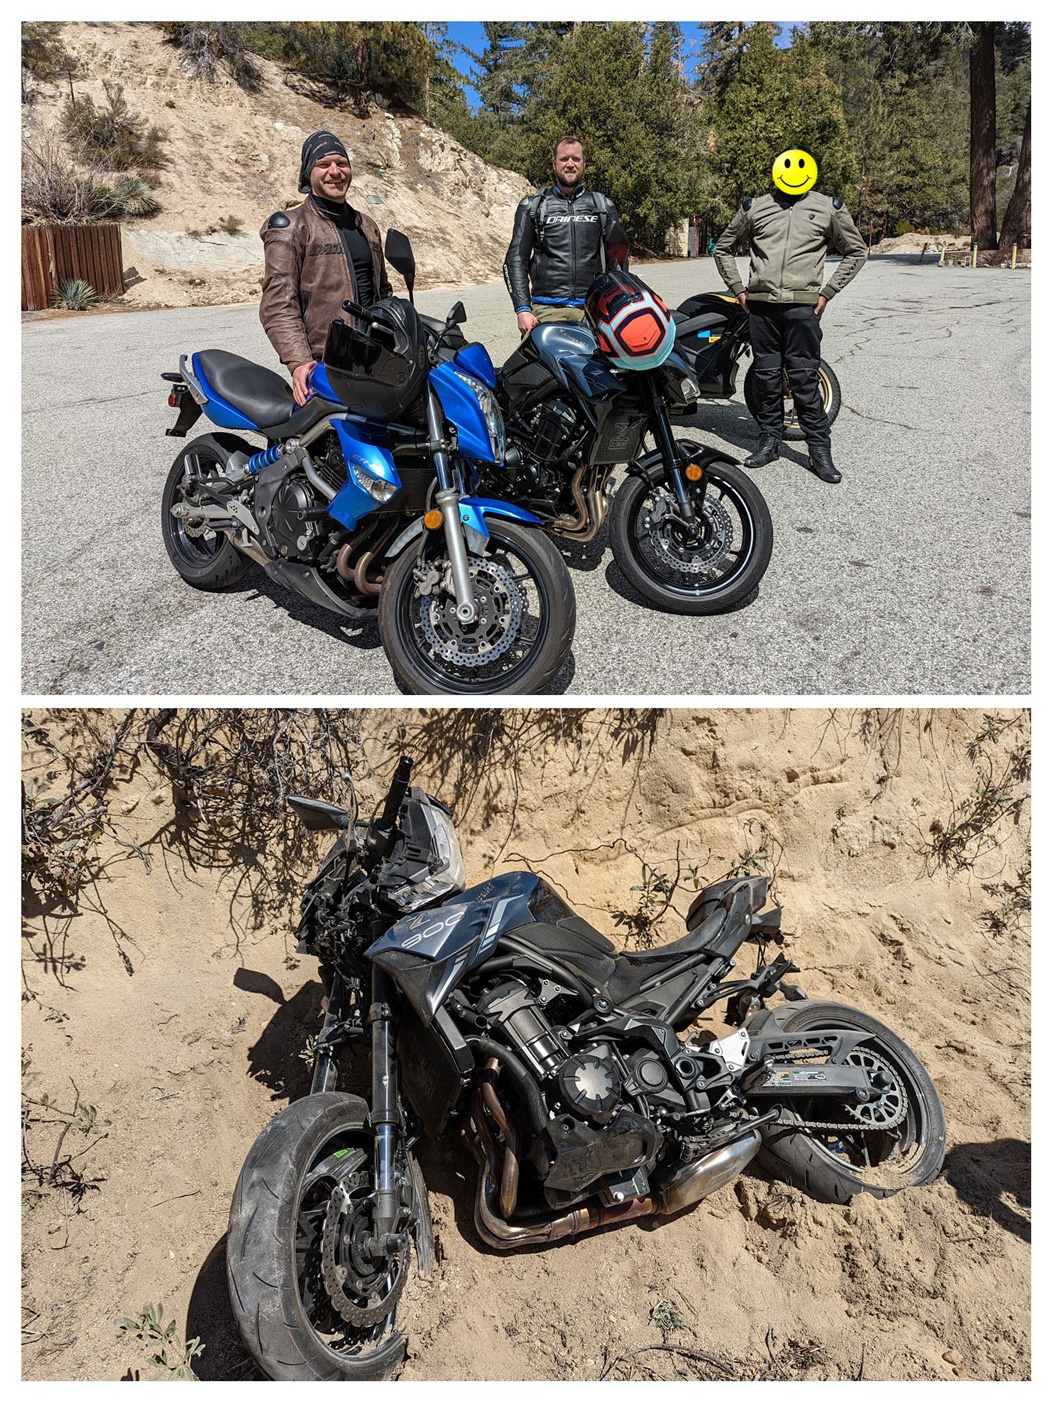 Motorcycles on Angeles Crest highway